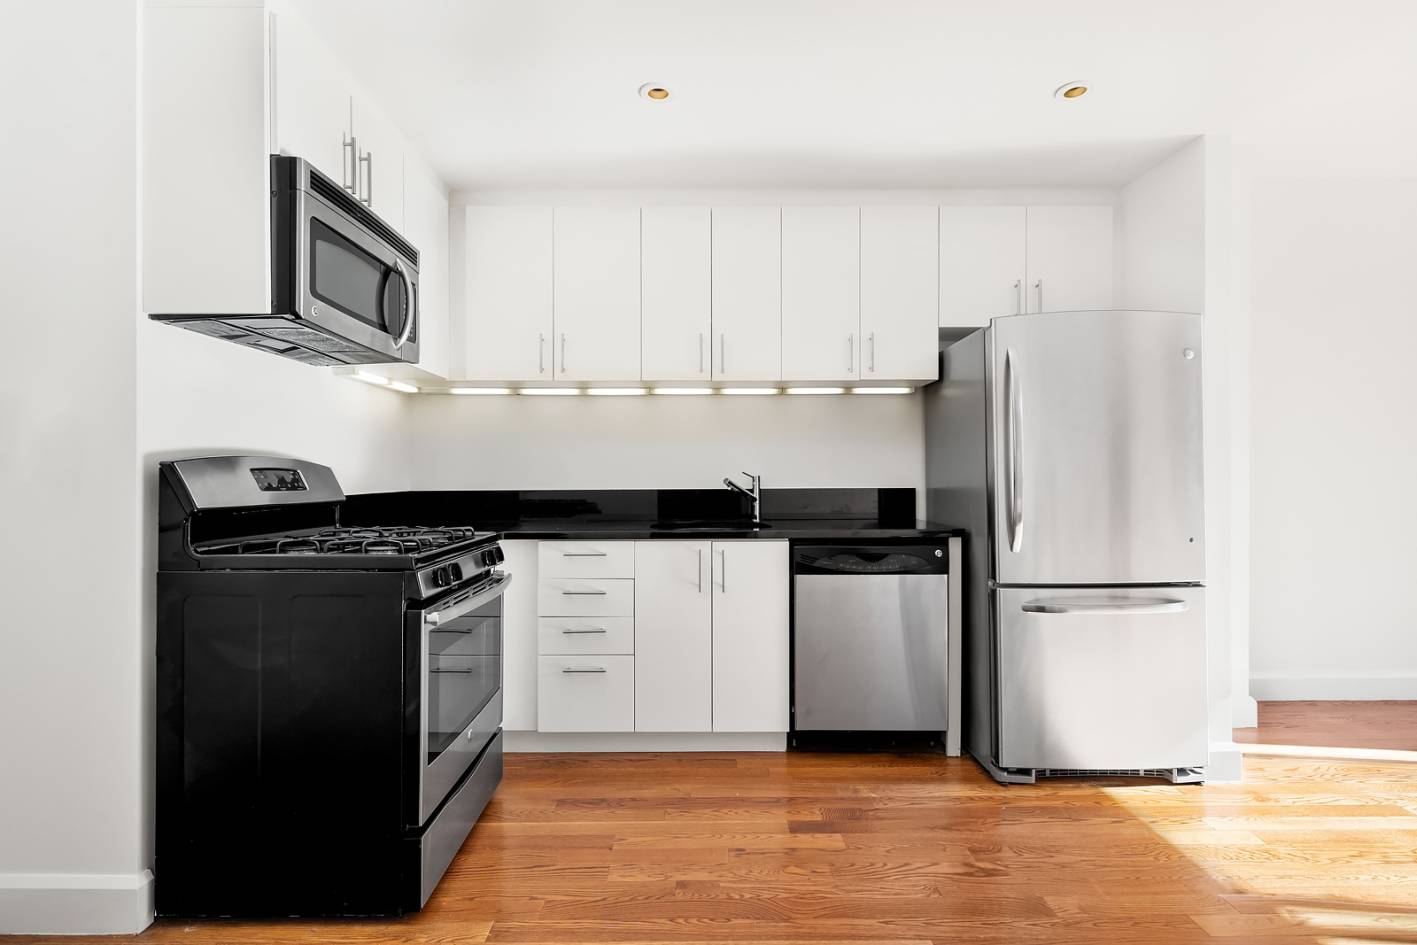 Stunning, modern two bedrooms unit with an open layout and over sized windows in a full service, amenity rich building at the charismatic convergence of Boerum Hill and Downtown Brooklyn.